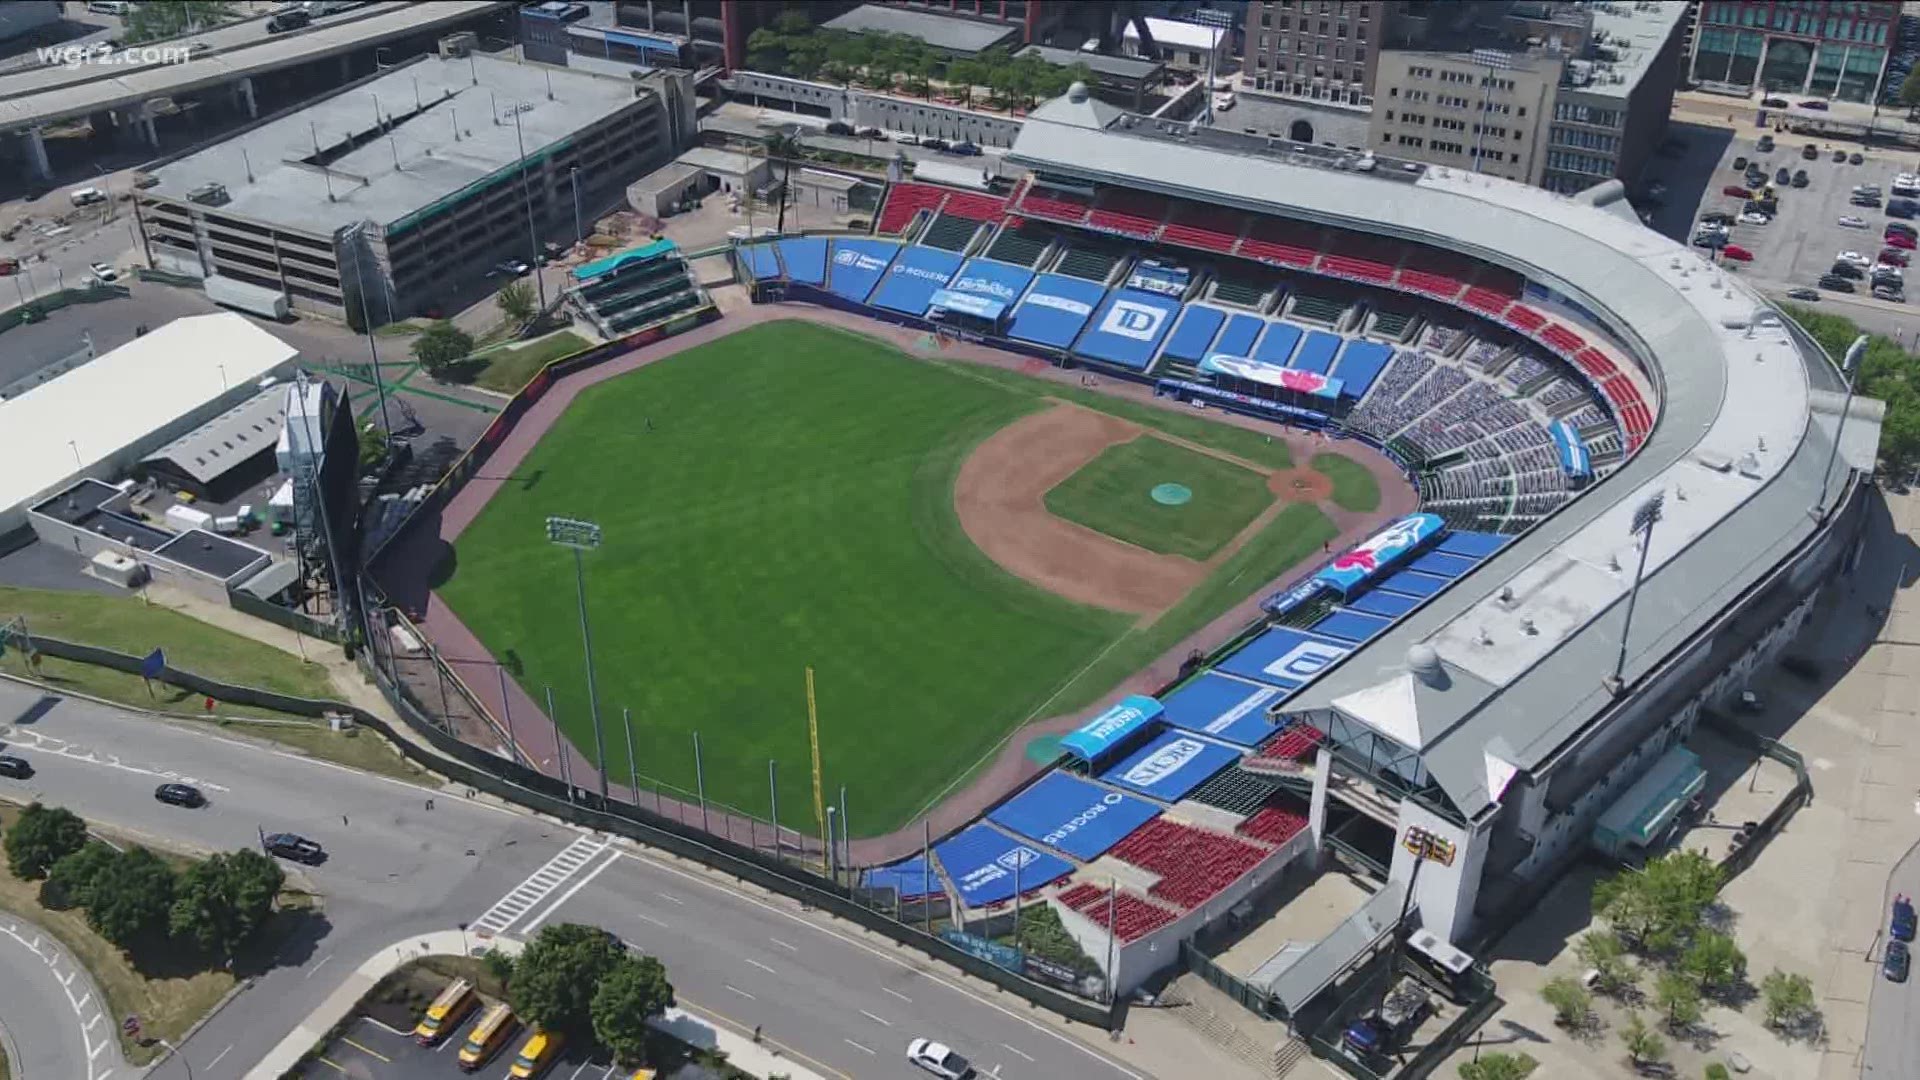 Regarding the upcoming Toronto Blue Jay's games at Sahlen Field in Buffalo, they are allowing more people who are fully vaccinated to attend the major league games.